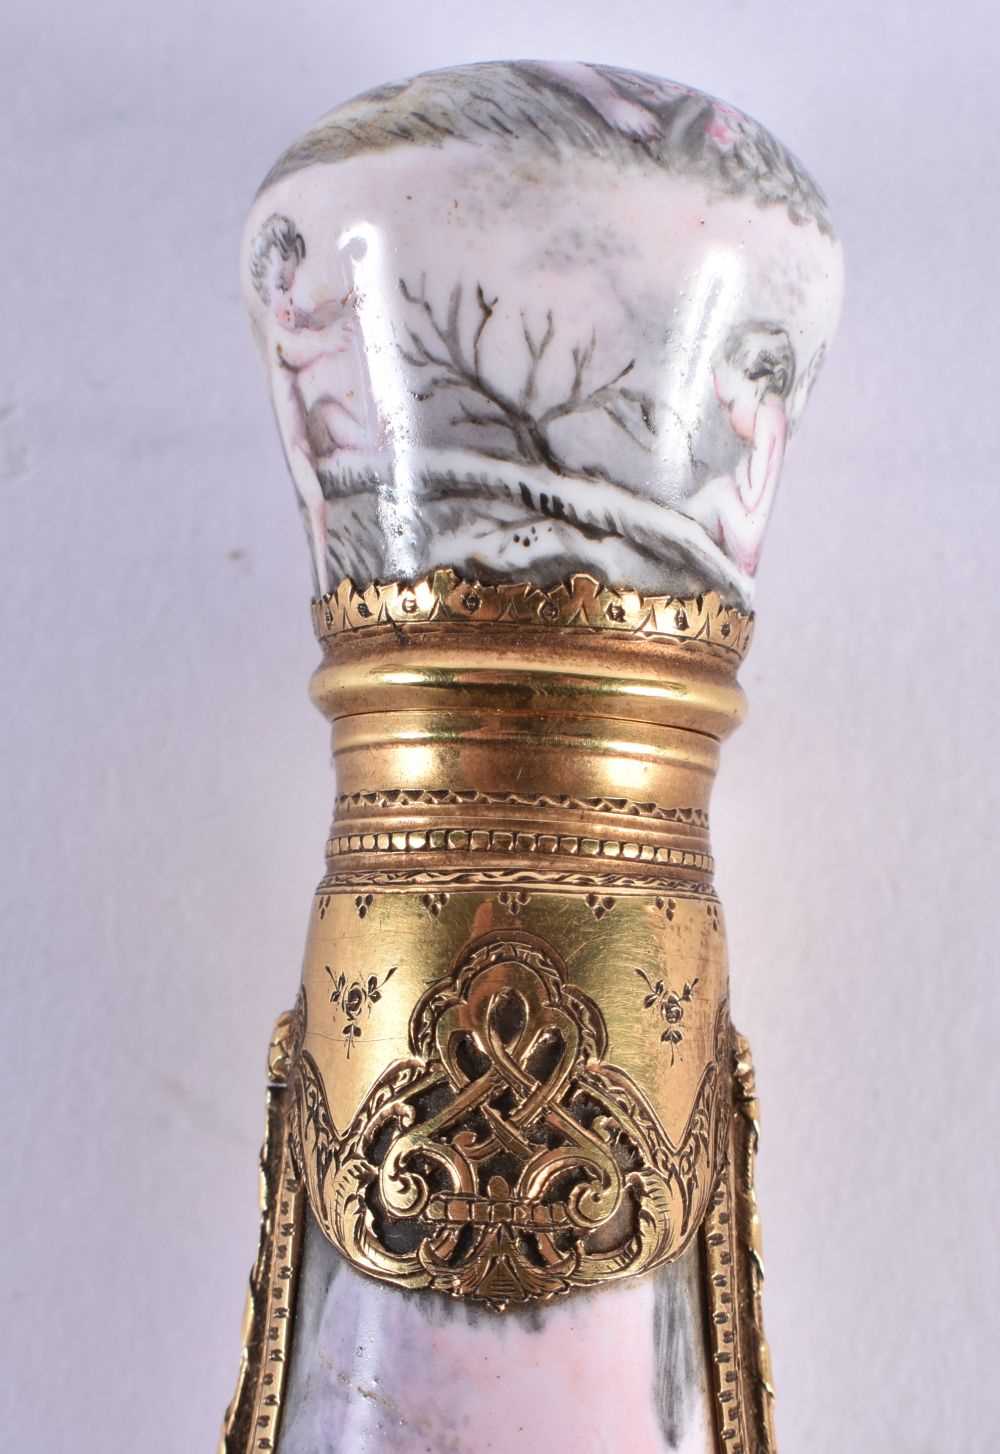 A FINE EARLY 19TH CENTURY VIENNESE ENAMEL AND ENGRAVED BRONZE SCENT BOTTLE AND STOPPER beautifully - Image 3 of 20